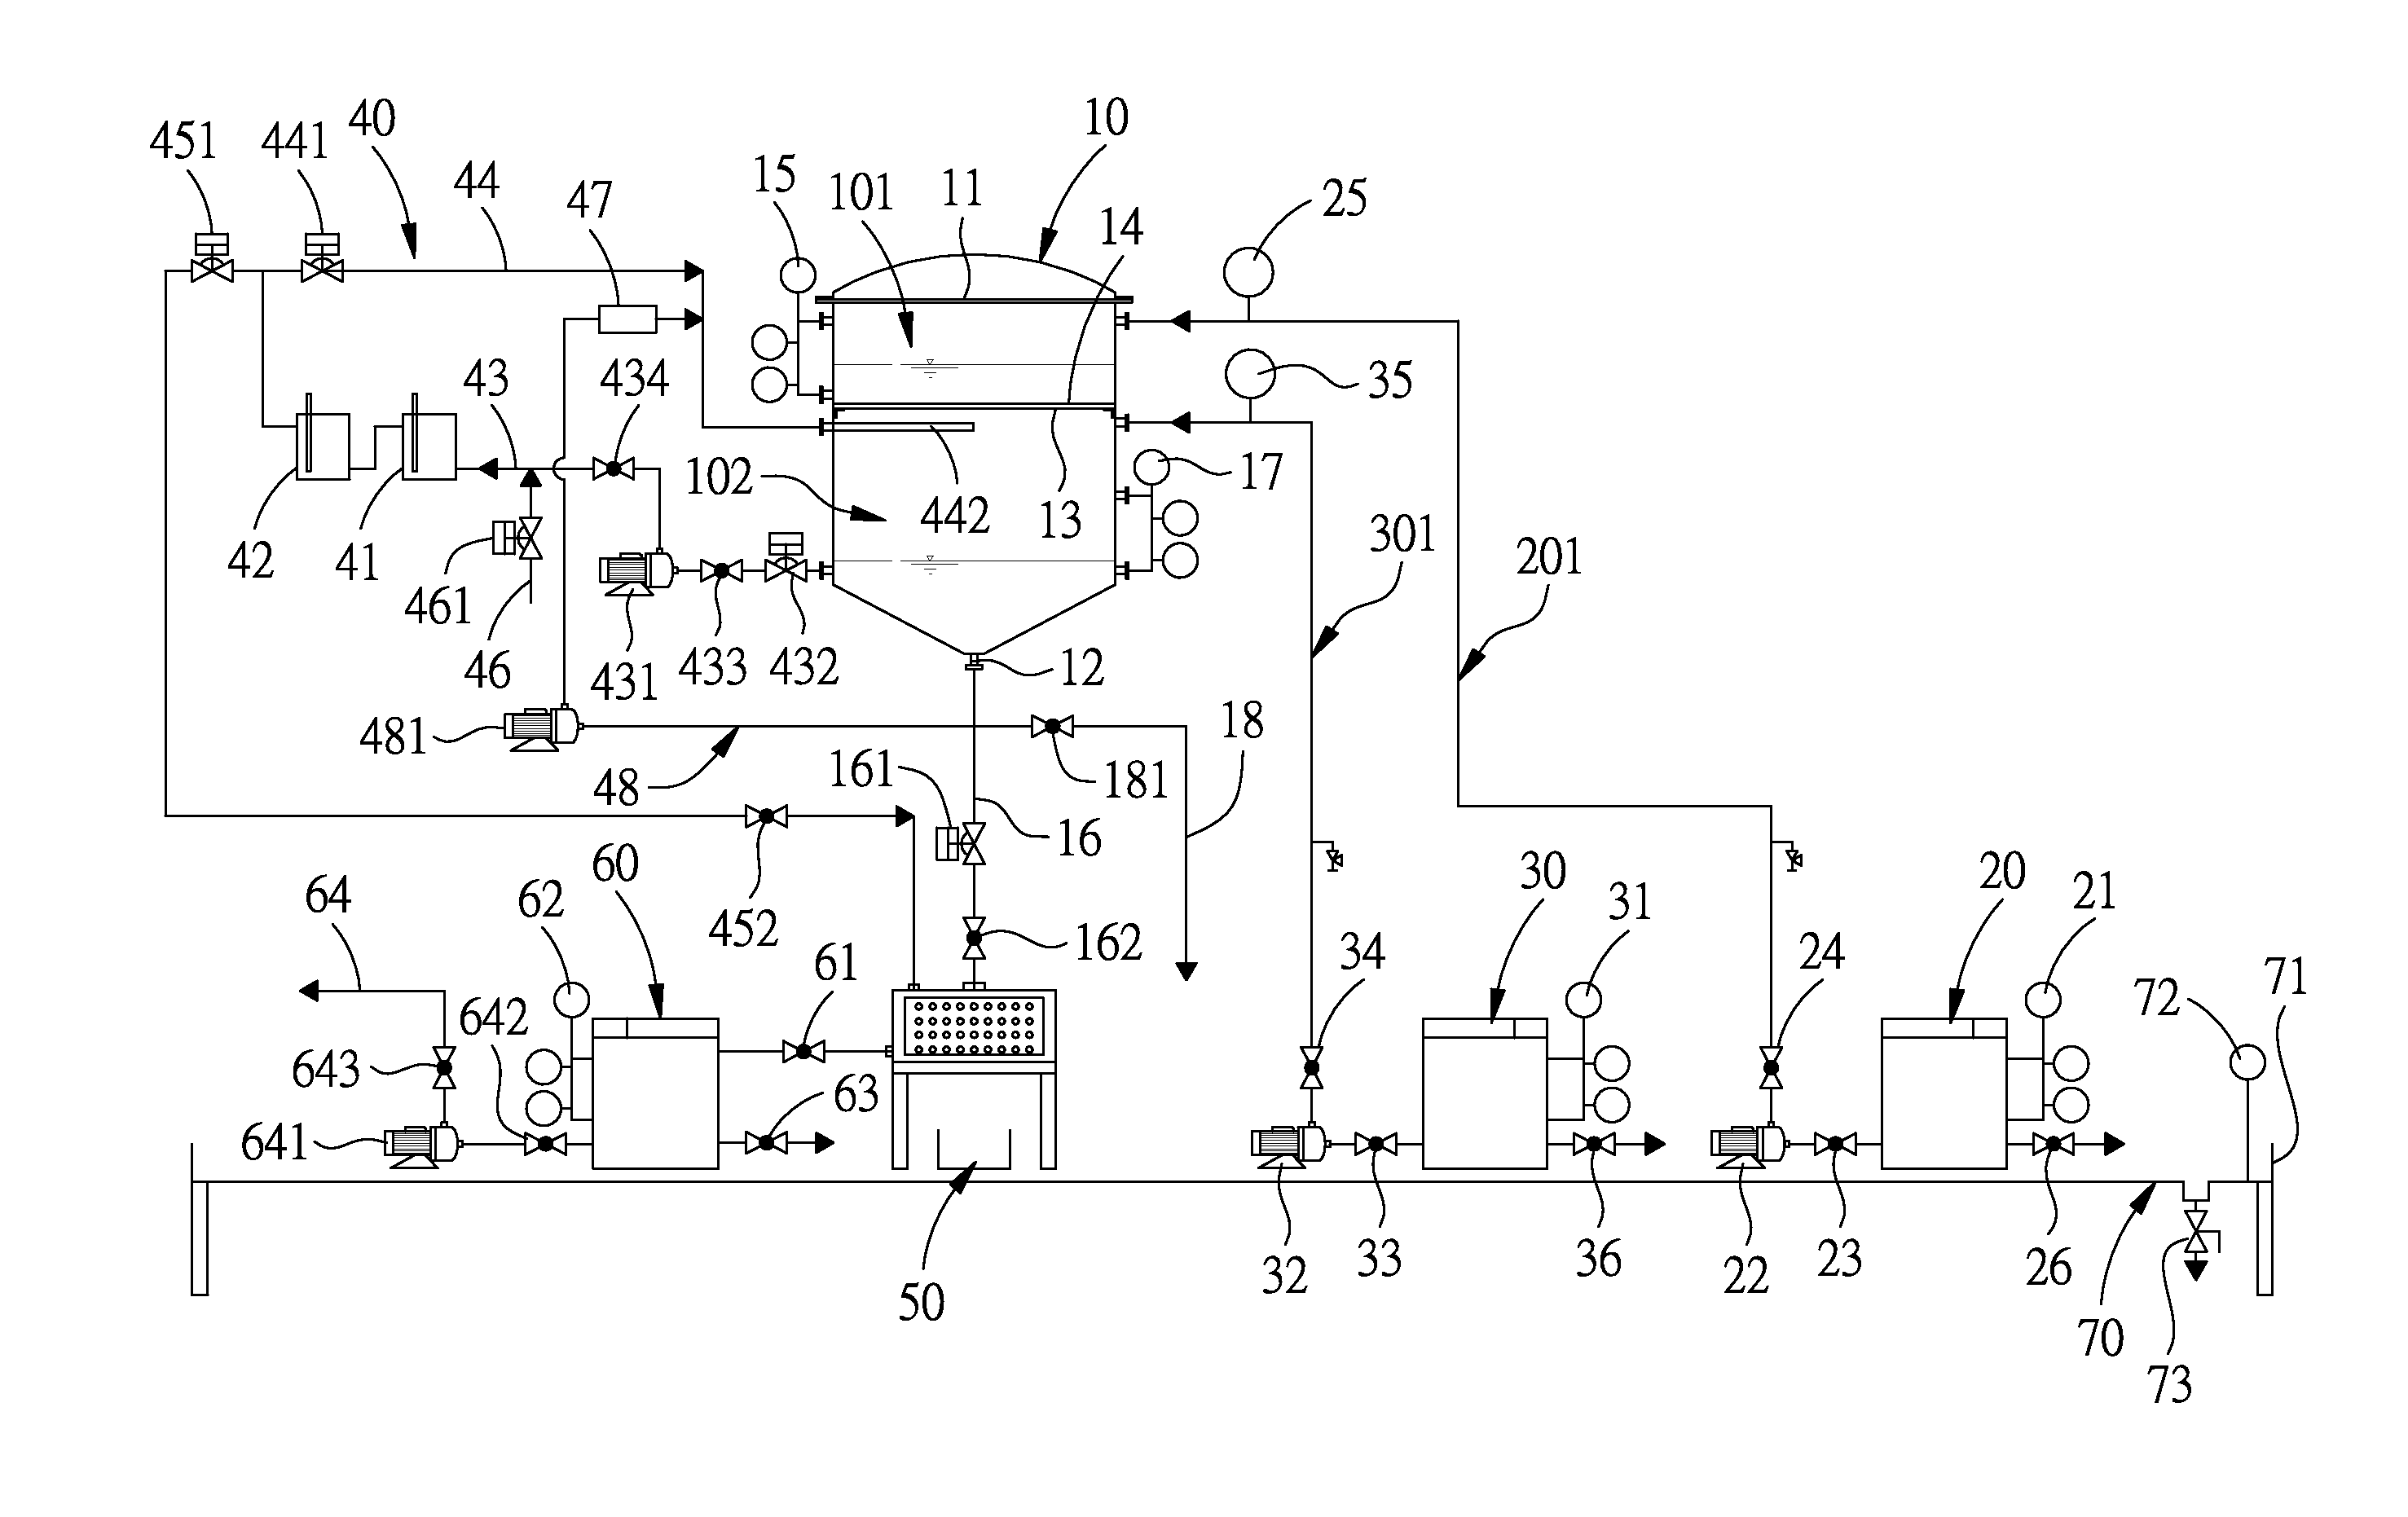 Crystallization system and method for producing sodium aluminum fluoride cryolite from hydrofluoric acid waste